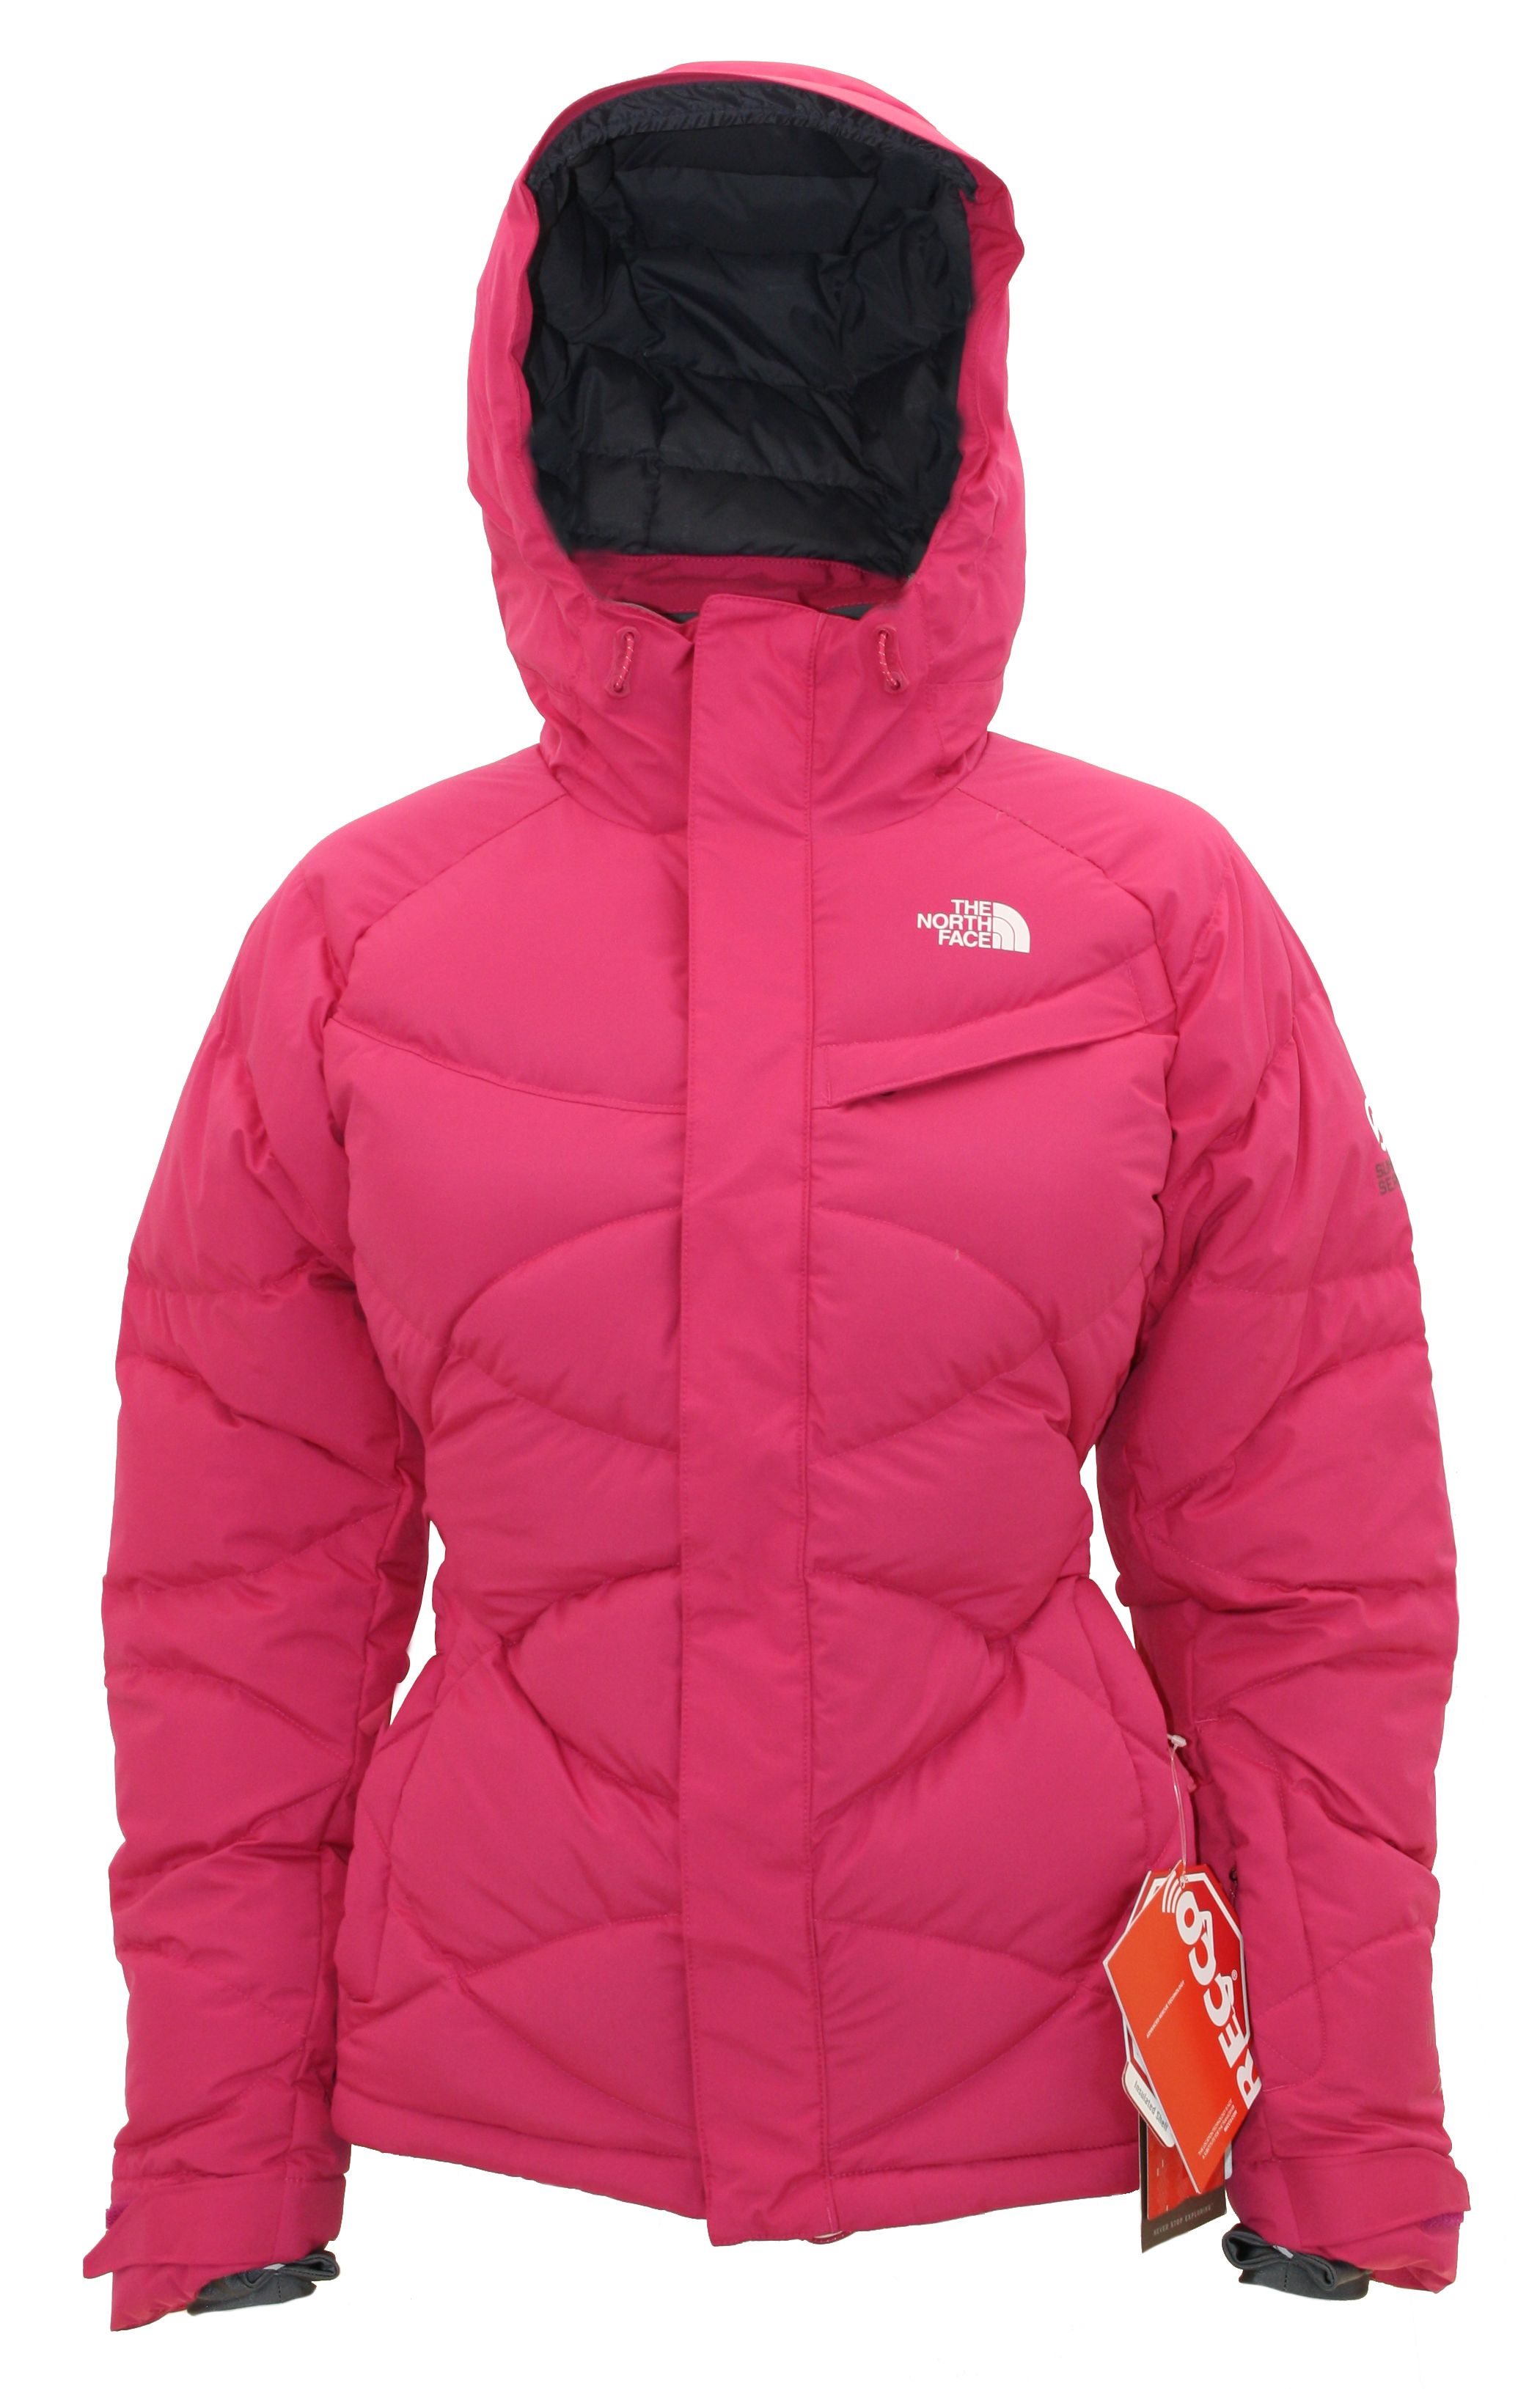  North Face Womens HELICITY DOWN WINDSTOPPER gore jacket PINK nwt sz M